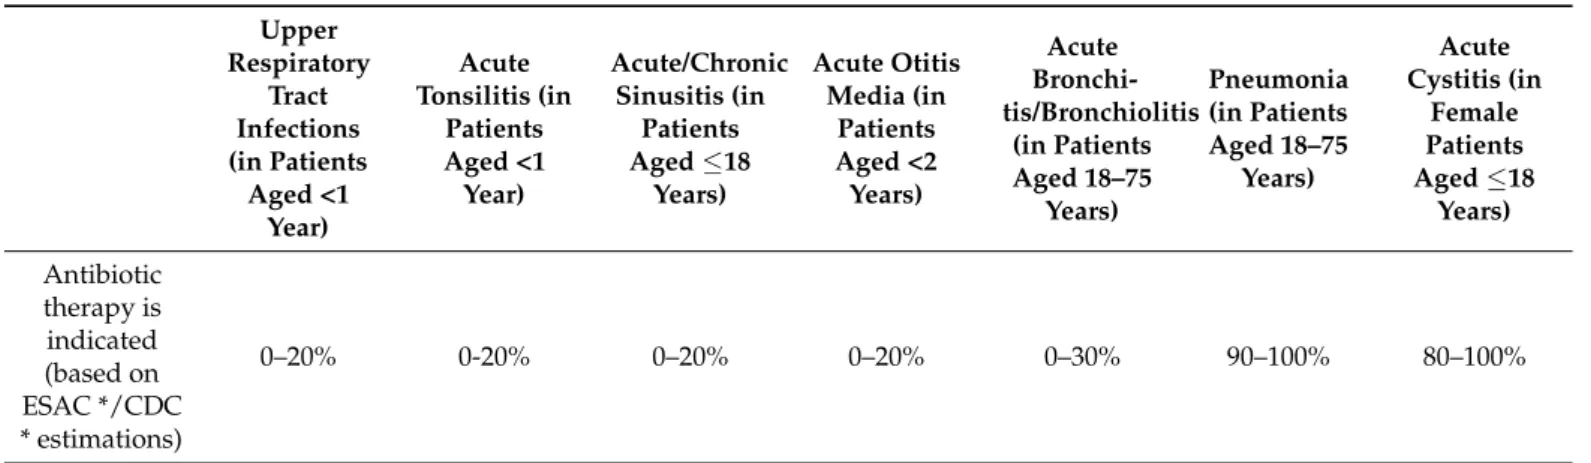 Table 1. Relevance of antibiotic-therapy in common ailments managed by primary care [43].